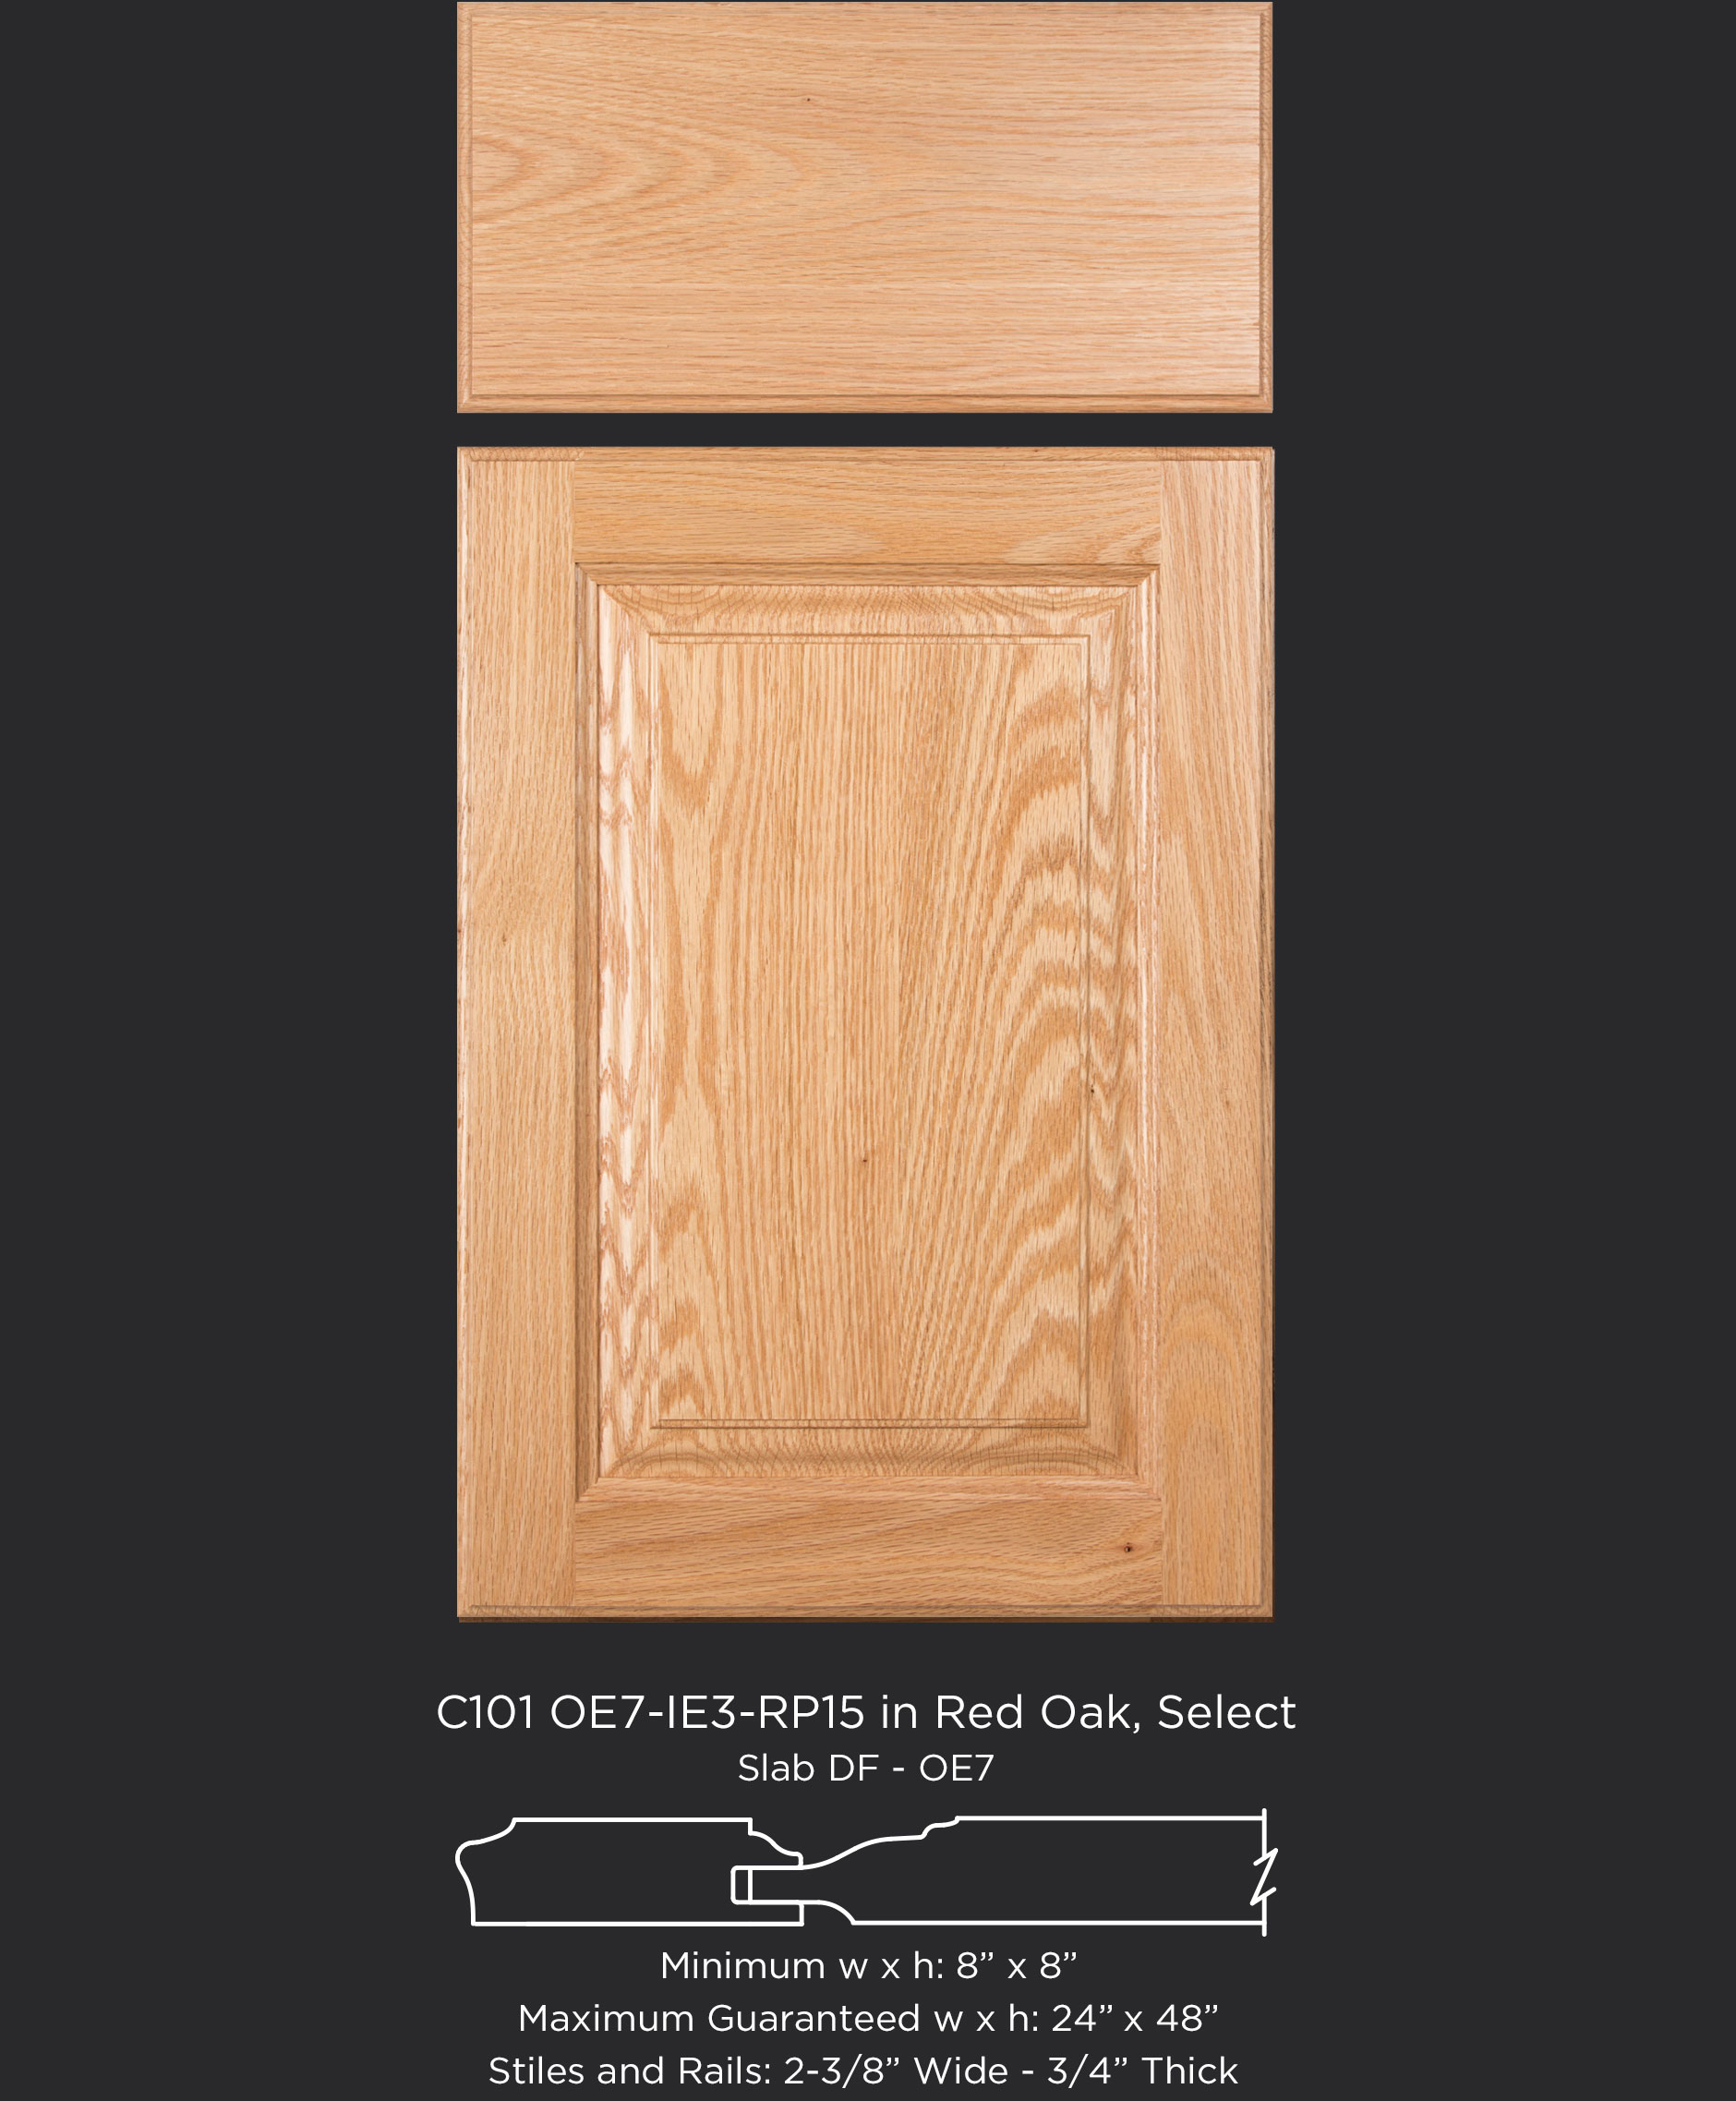 Cope and Stick Cabinet Door C101 OE7-IE3-RP15 Red Oak, Select and slab drawer front with OE7